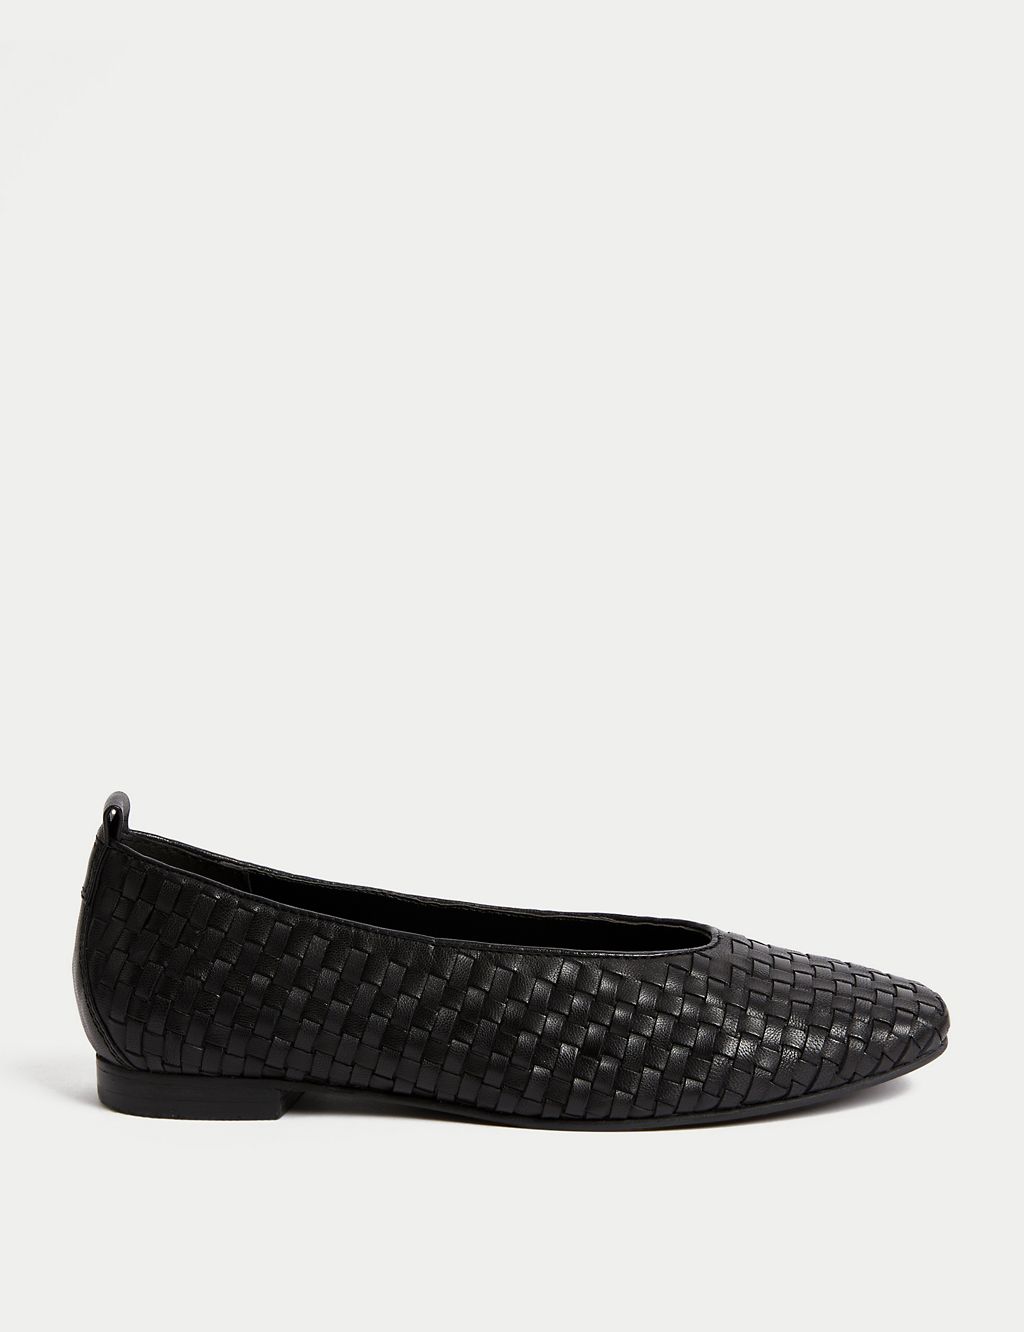 Leather Woven Flat Ballet Pumps 3 of 3